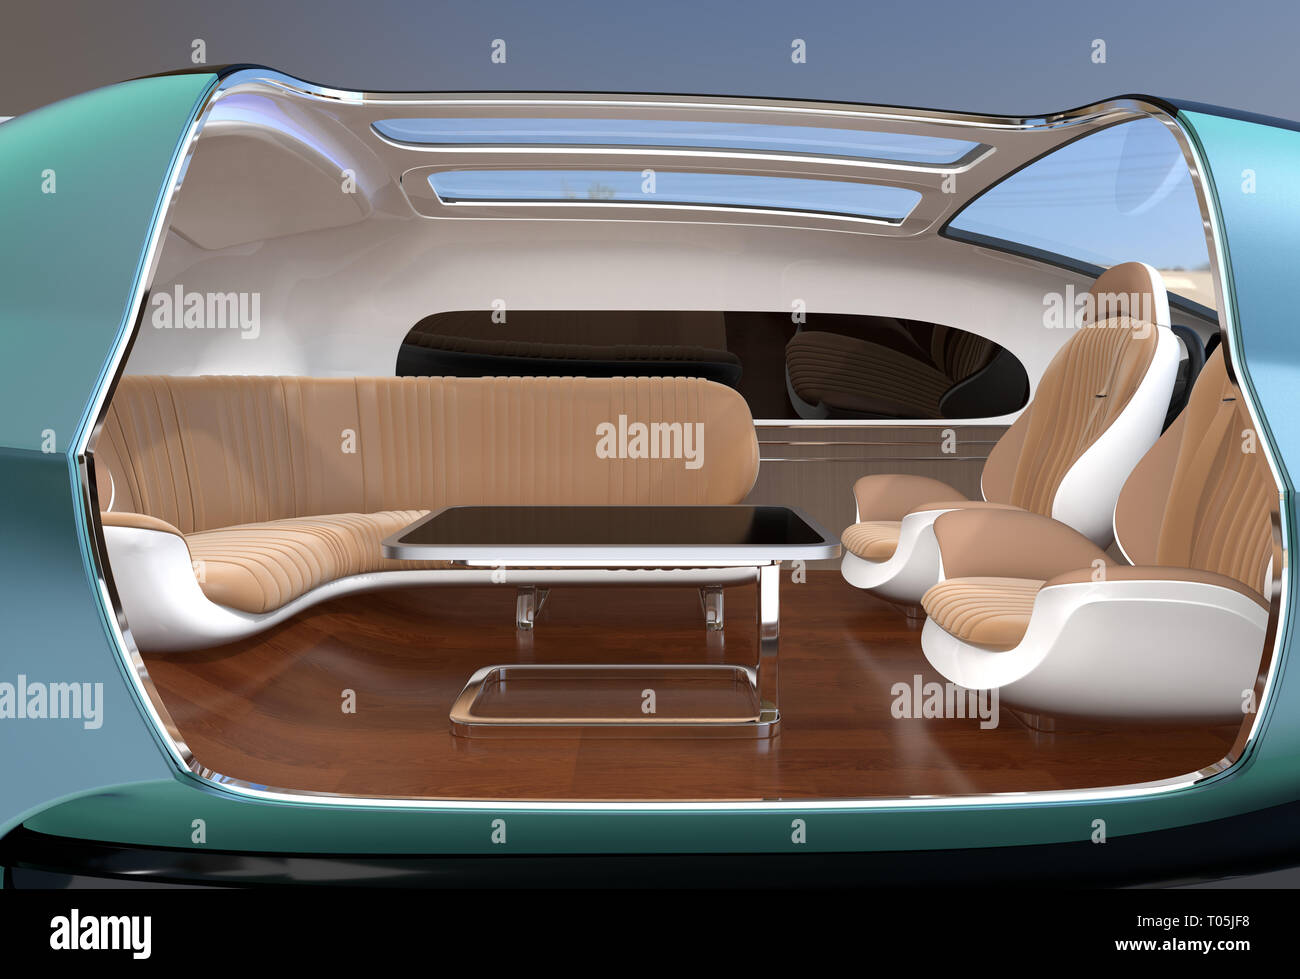 Close-up view of self driving electric car interior. 3D rendering image. Stock Photo